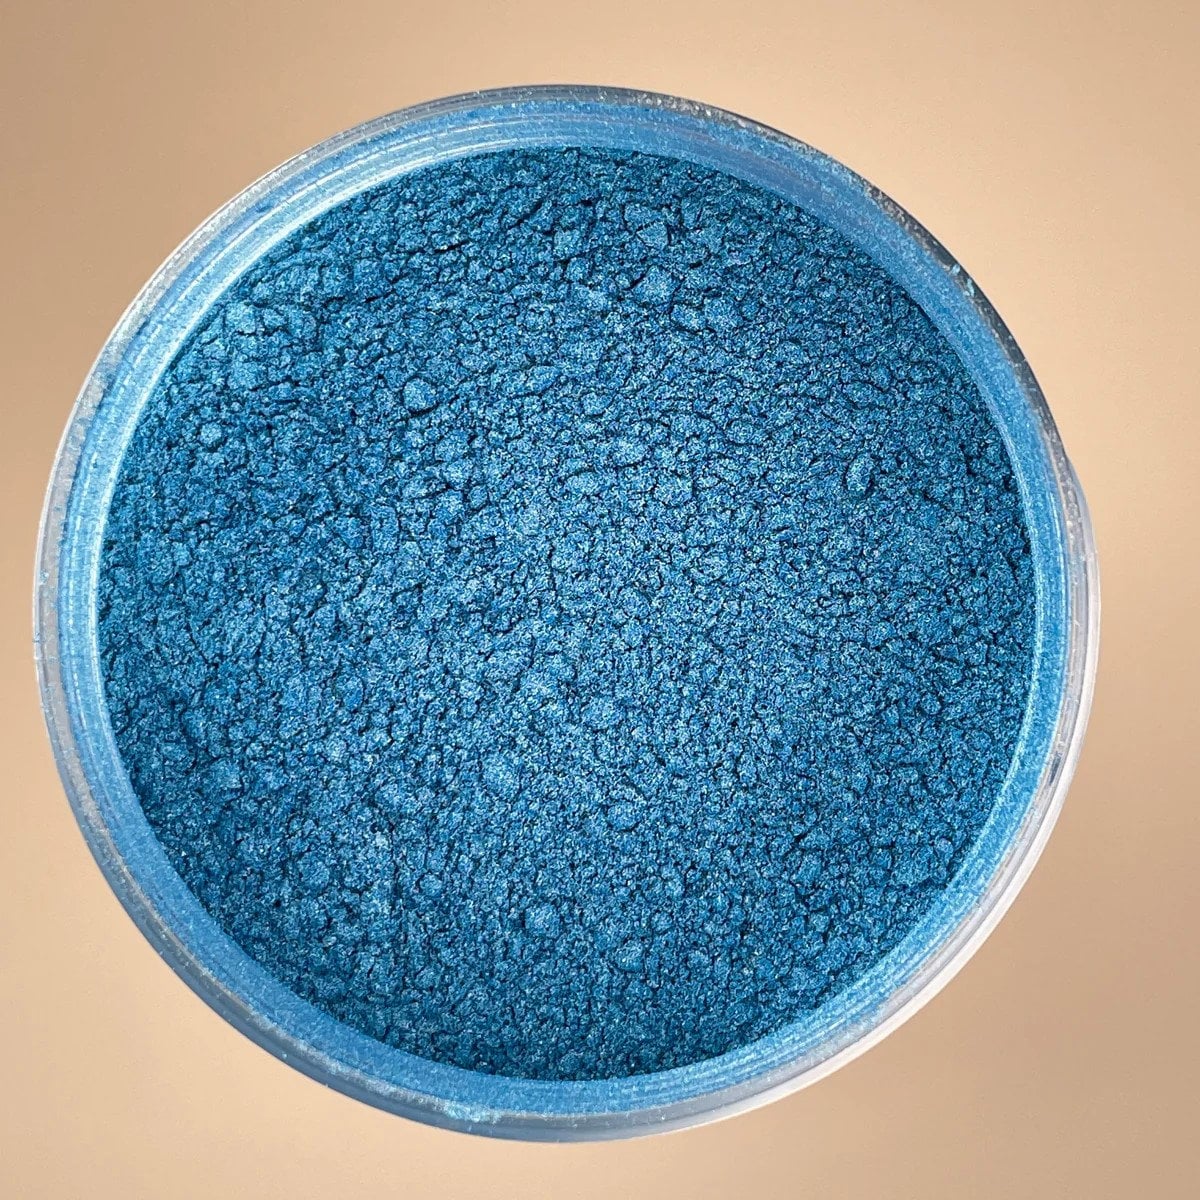 Mica Powder - Ocean Blue - Mica Powder For Epoxy Resin, Candle Making, Soap Making, Makeup, Nail Art and Much More - TMResinsupplies